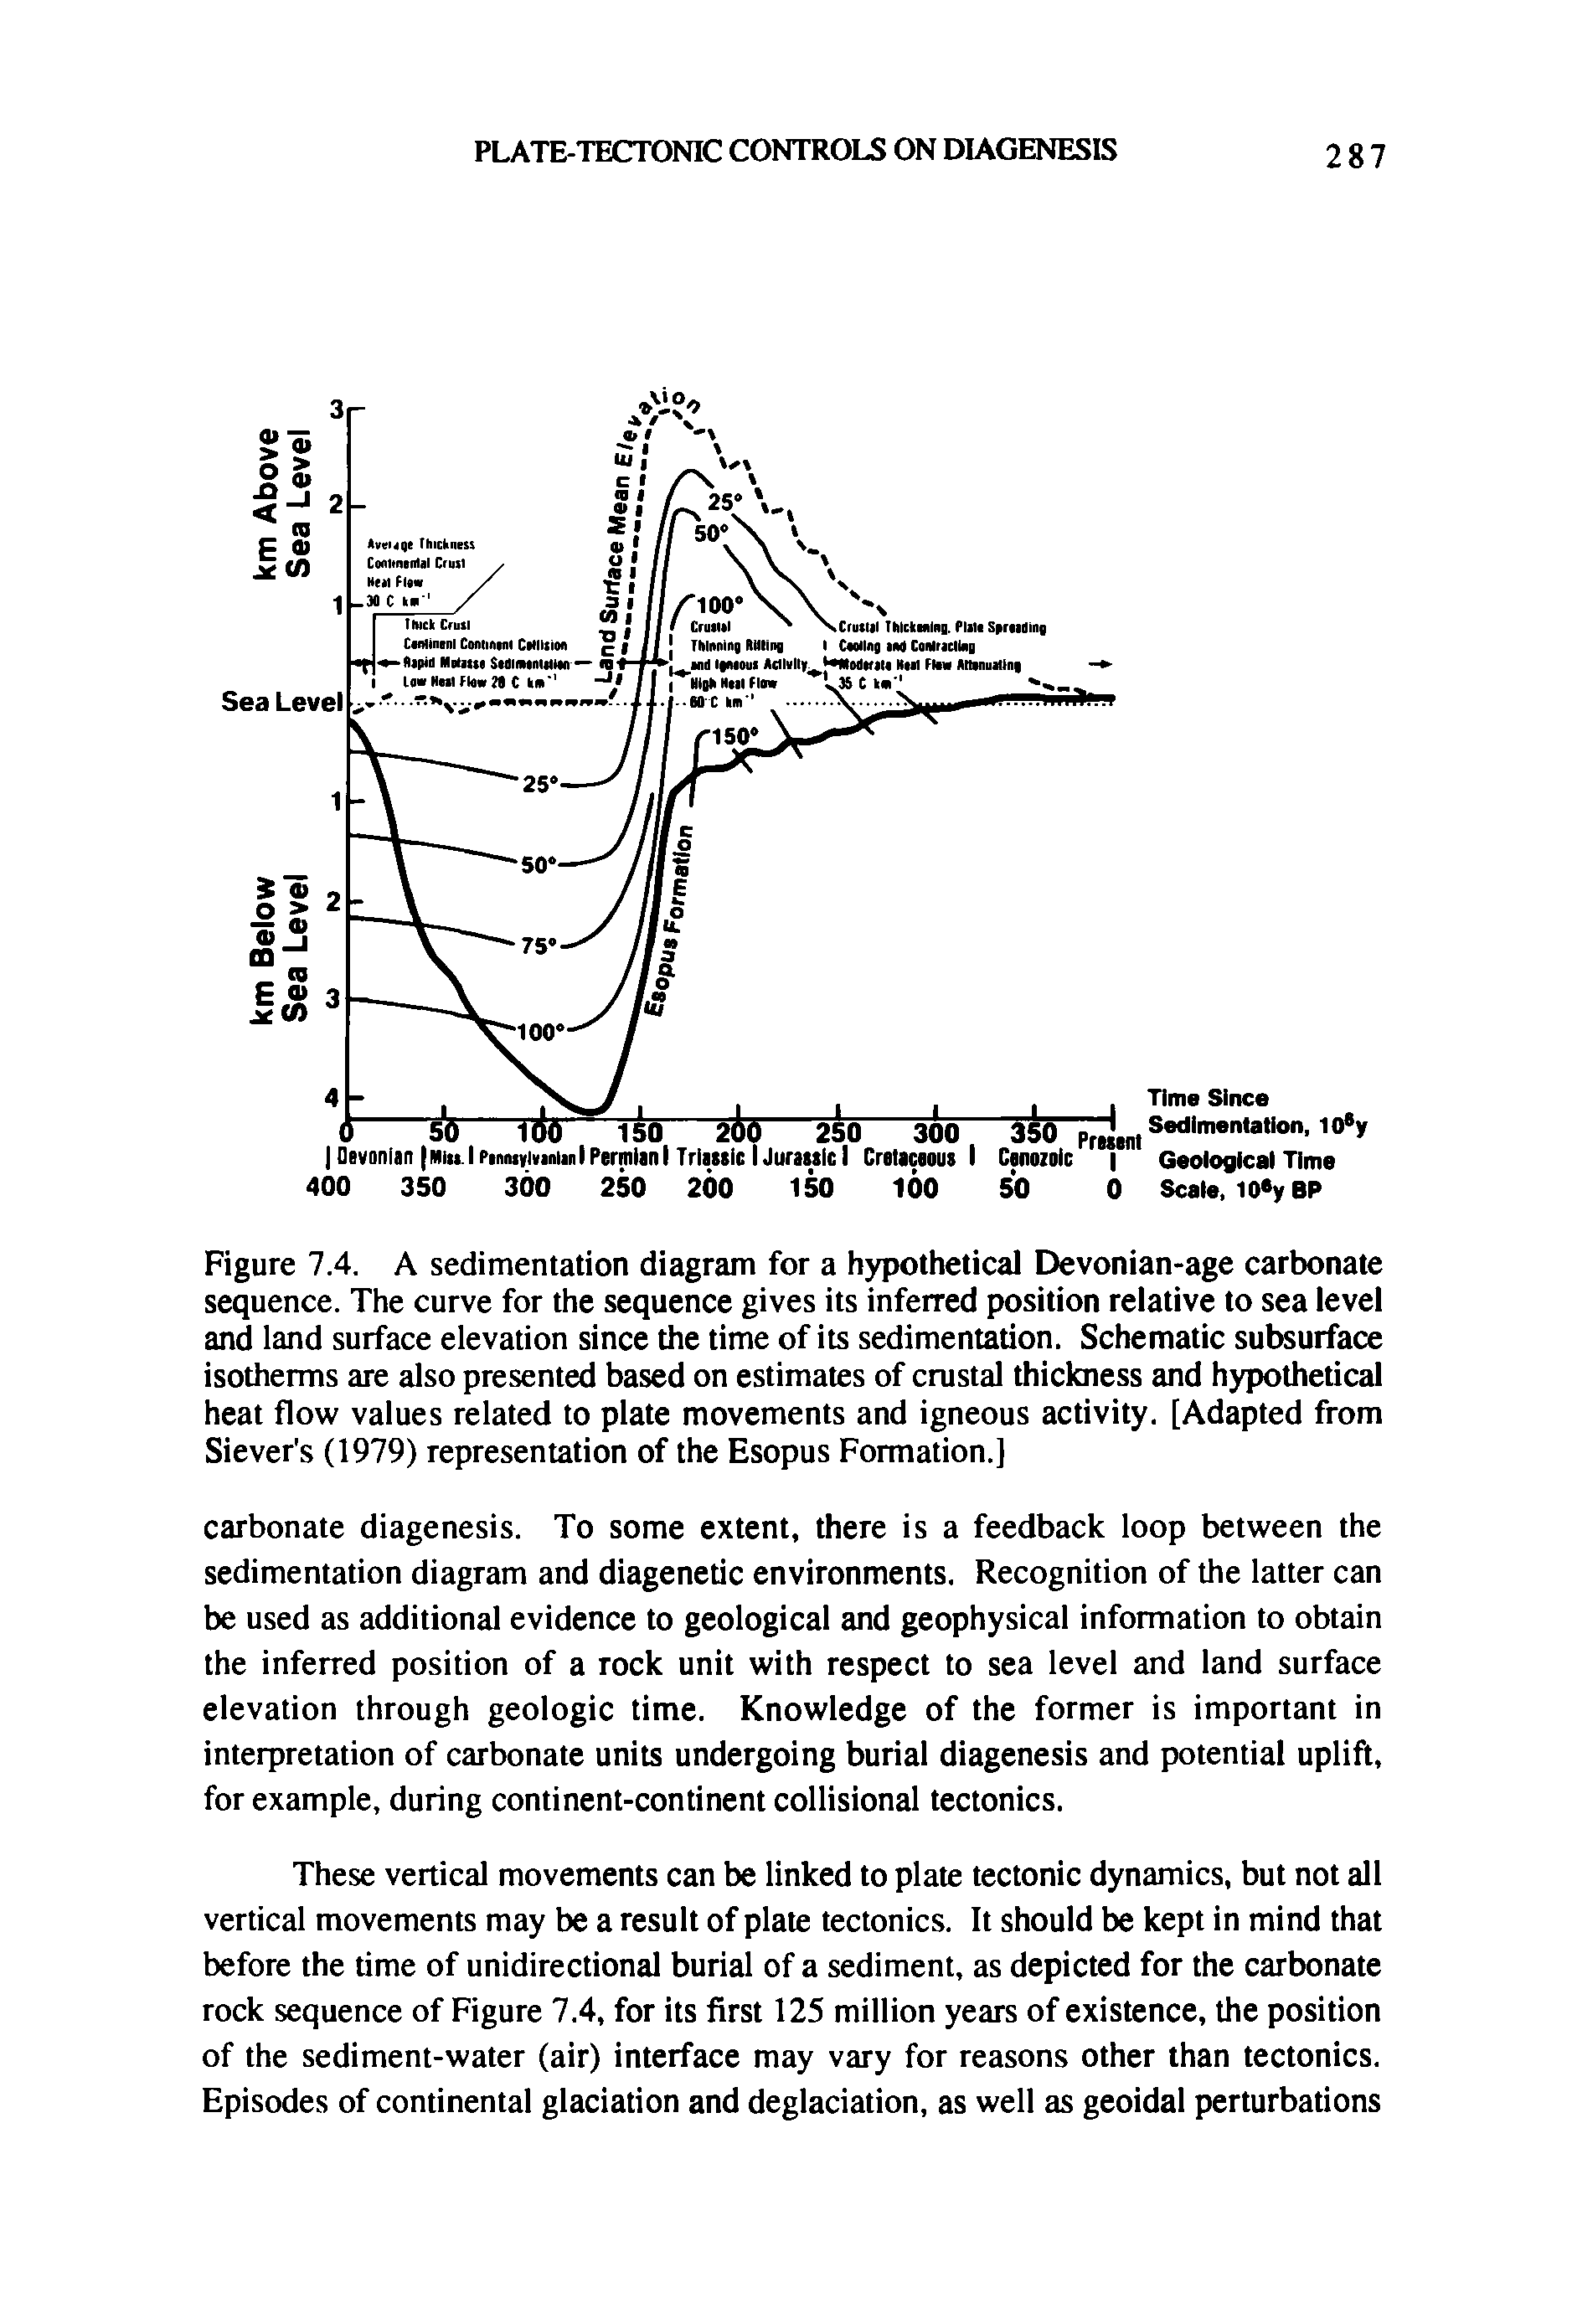 Figure 7.4. A sedimentation diagram for a hypothetical Devonian-age carbonate sequence. The curve for the sequence gives its inferred position relative to sea level and land surface elevation since the time of its sedimentation. Schematic subsurface isotherms are also presented based on estimates of crustal thickness and hypothetical heat flow values related to plate movements and igneous activity. [Adapted from Siever s (1979) representation of the Esopus Formation.]...